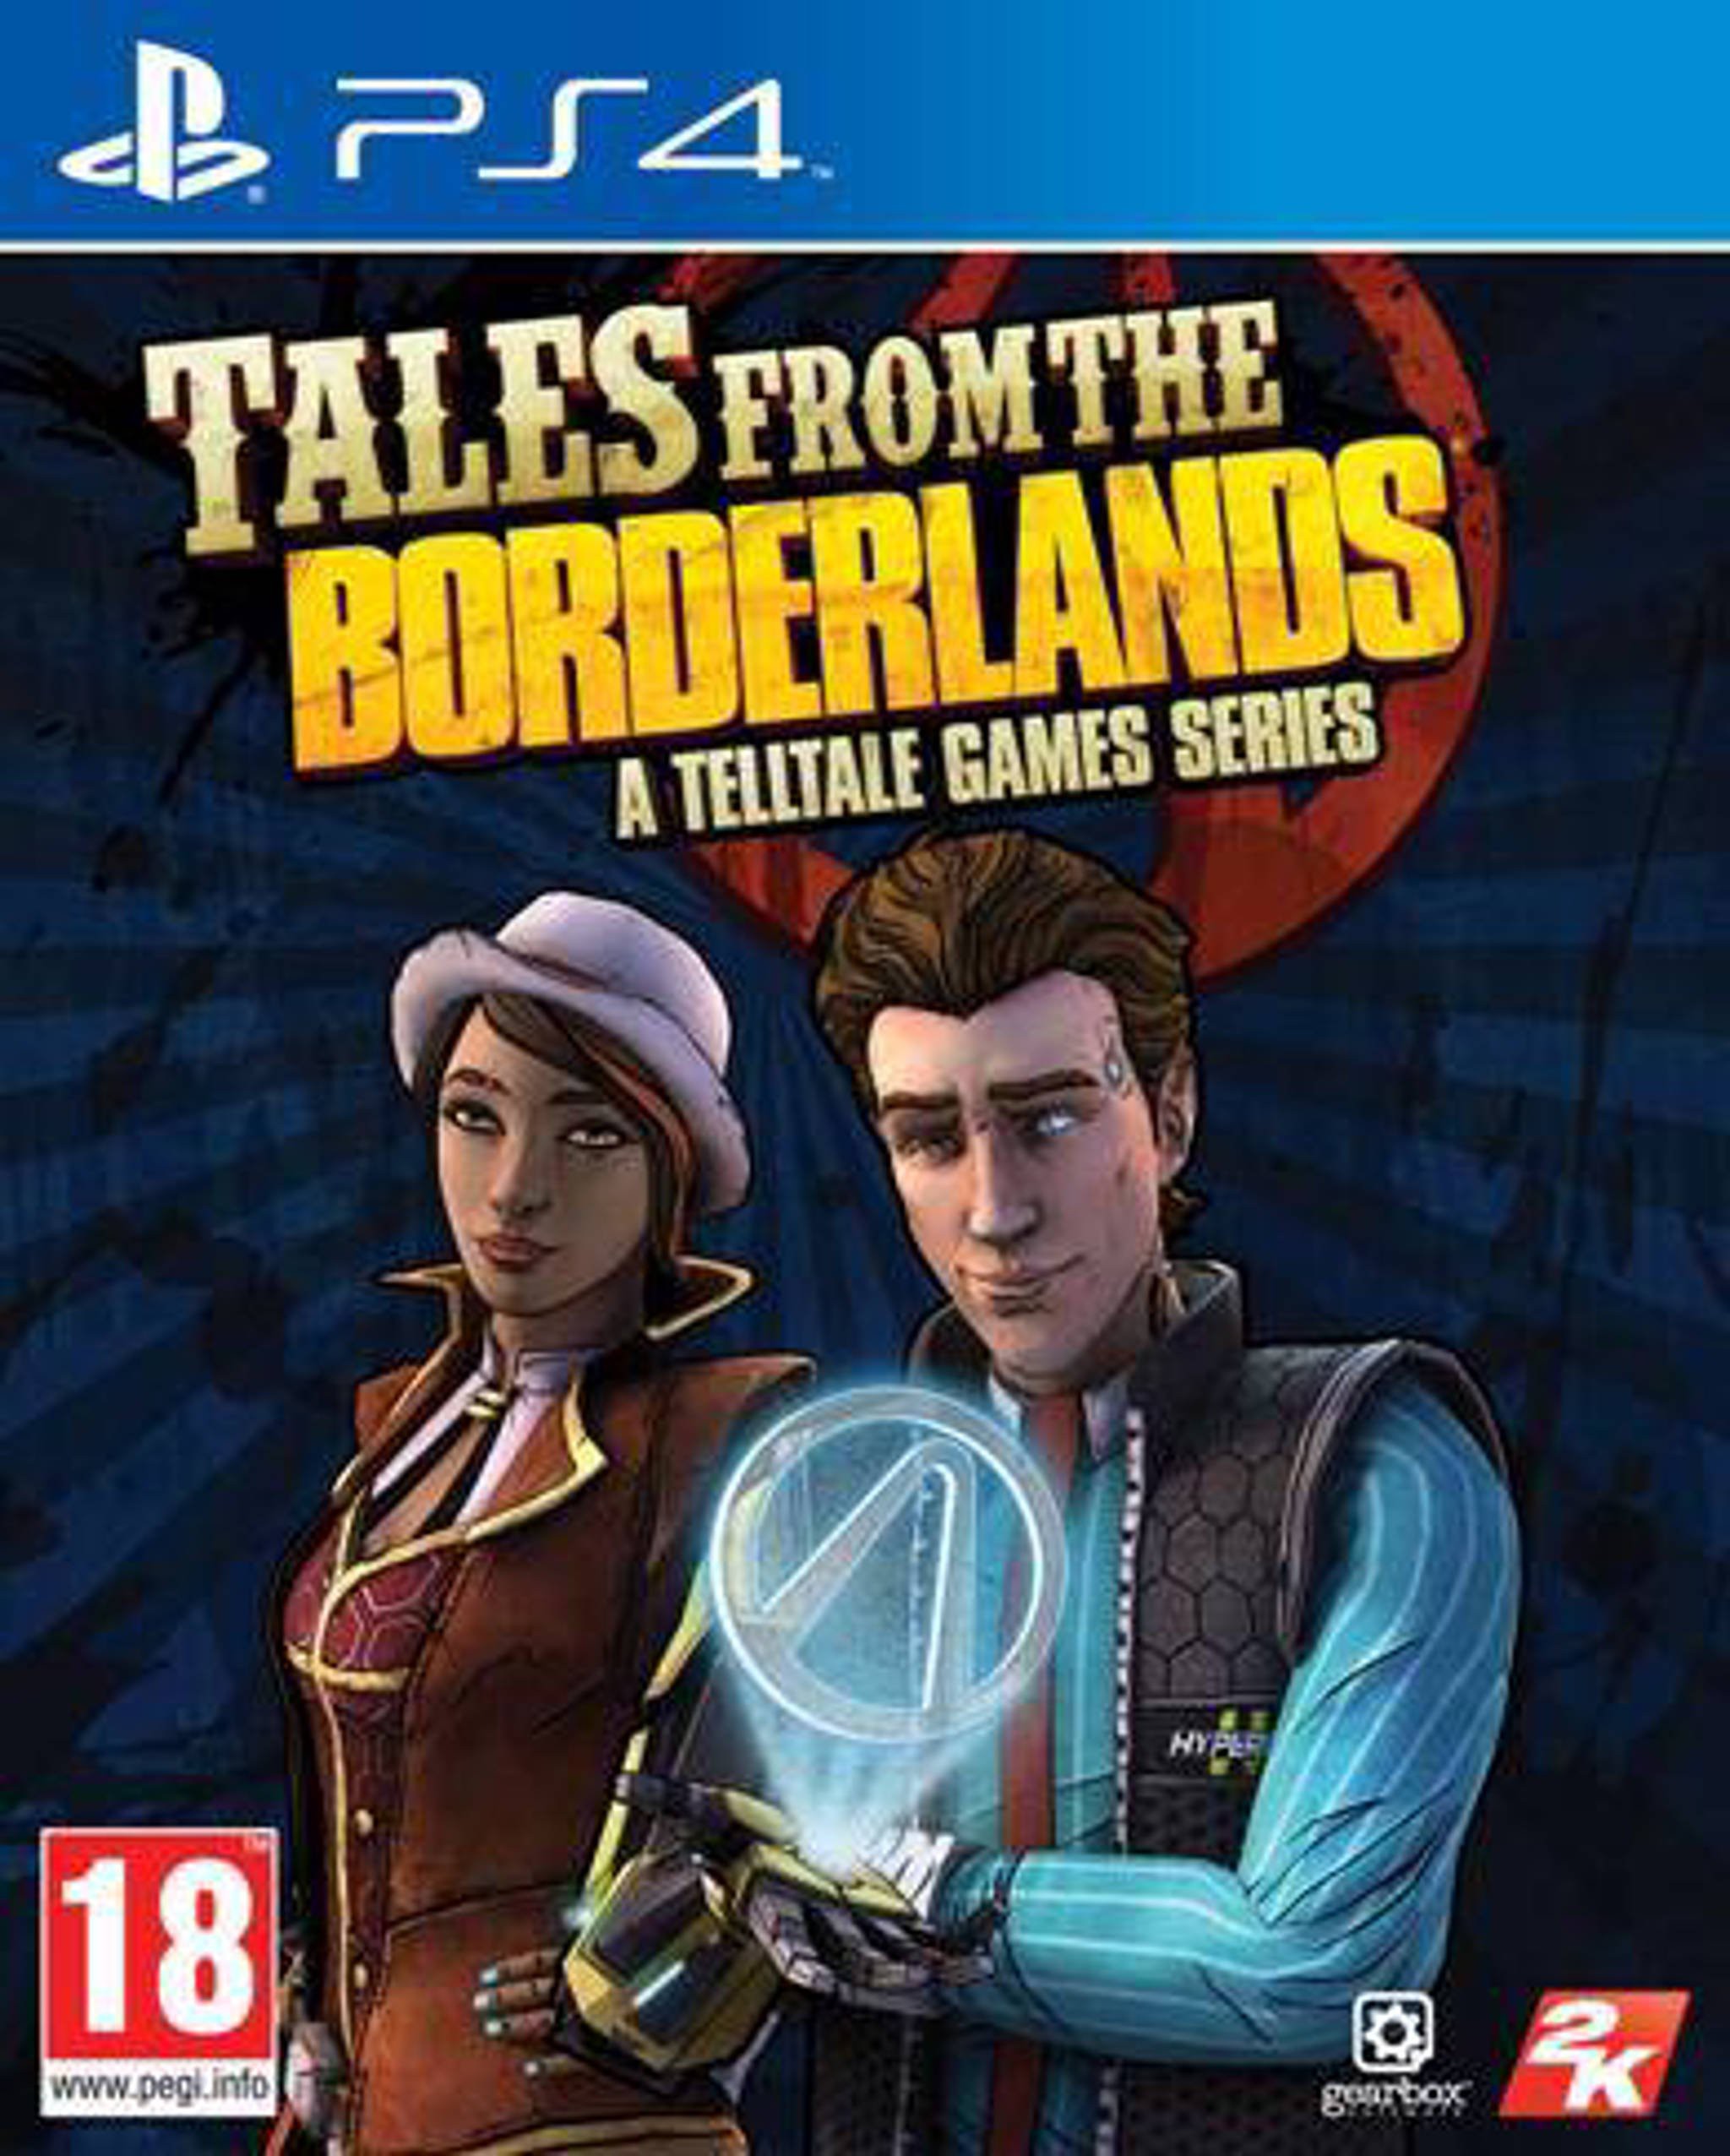 Tales from the Borderlands | Playstation 4 Games | RetroPlaystationKopen.nl